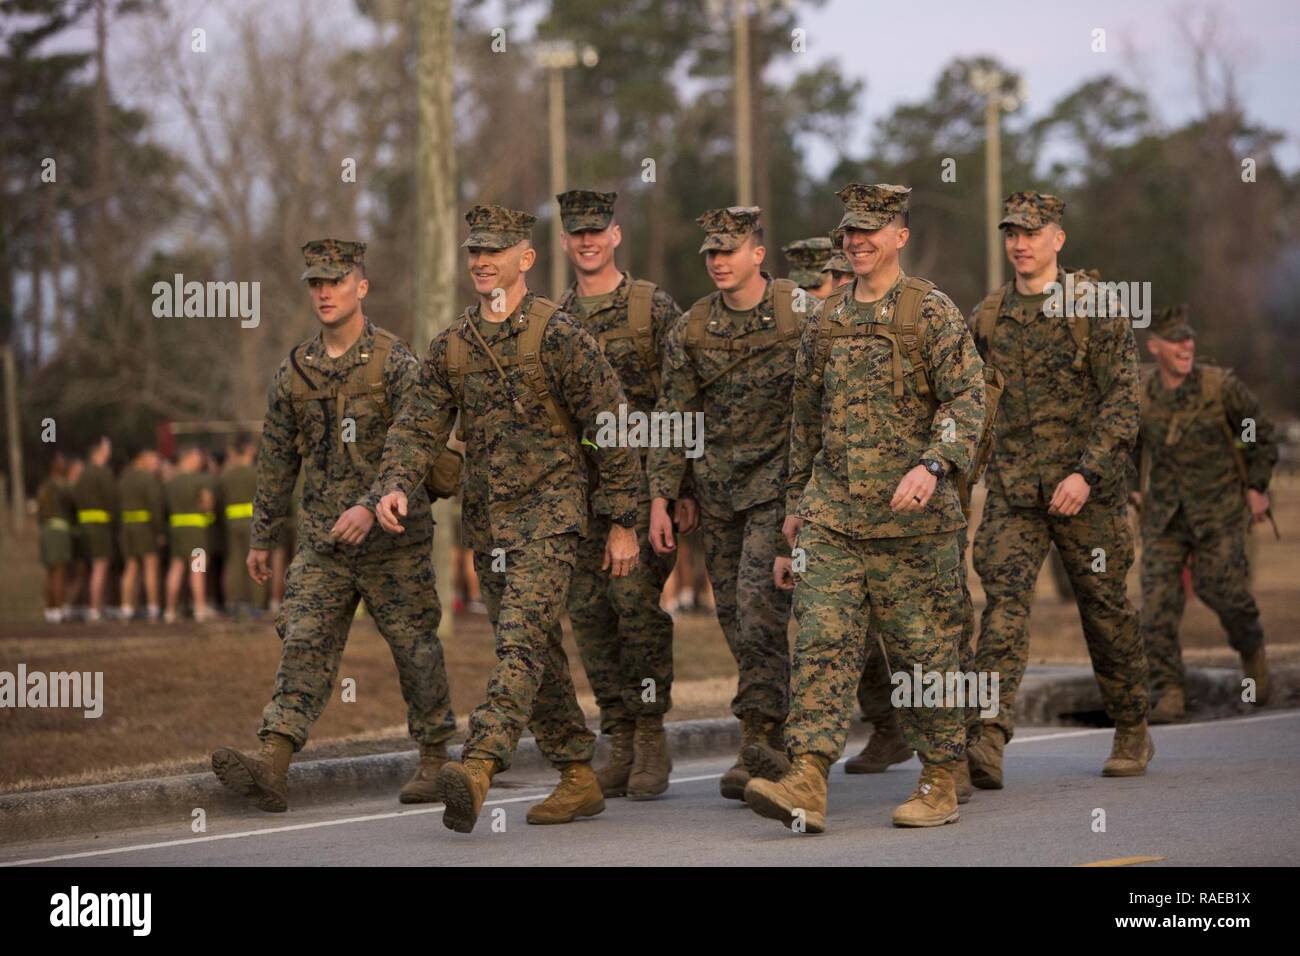 U.S. Marines with 2nd Marine Division (2d MARDIV), participate in the 2d MARDIV 50-mile challenge hike on Camp Lejeune, N.C., Feb. 1, 2017. The hike was held to challenge Marines of 2d MARDIV as well as test their skill and will. Stock Photo